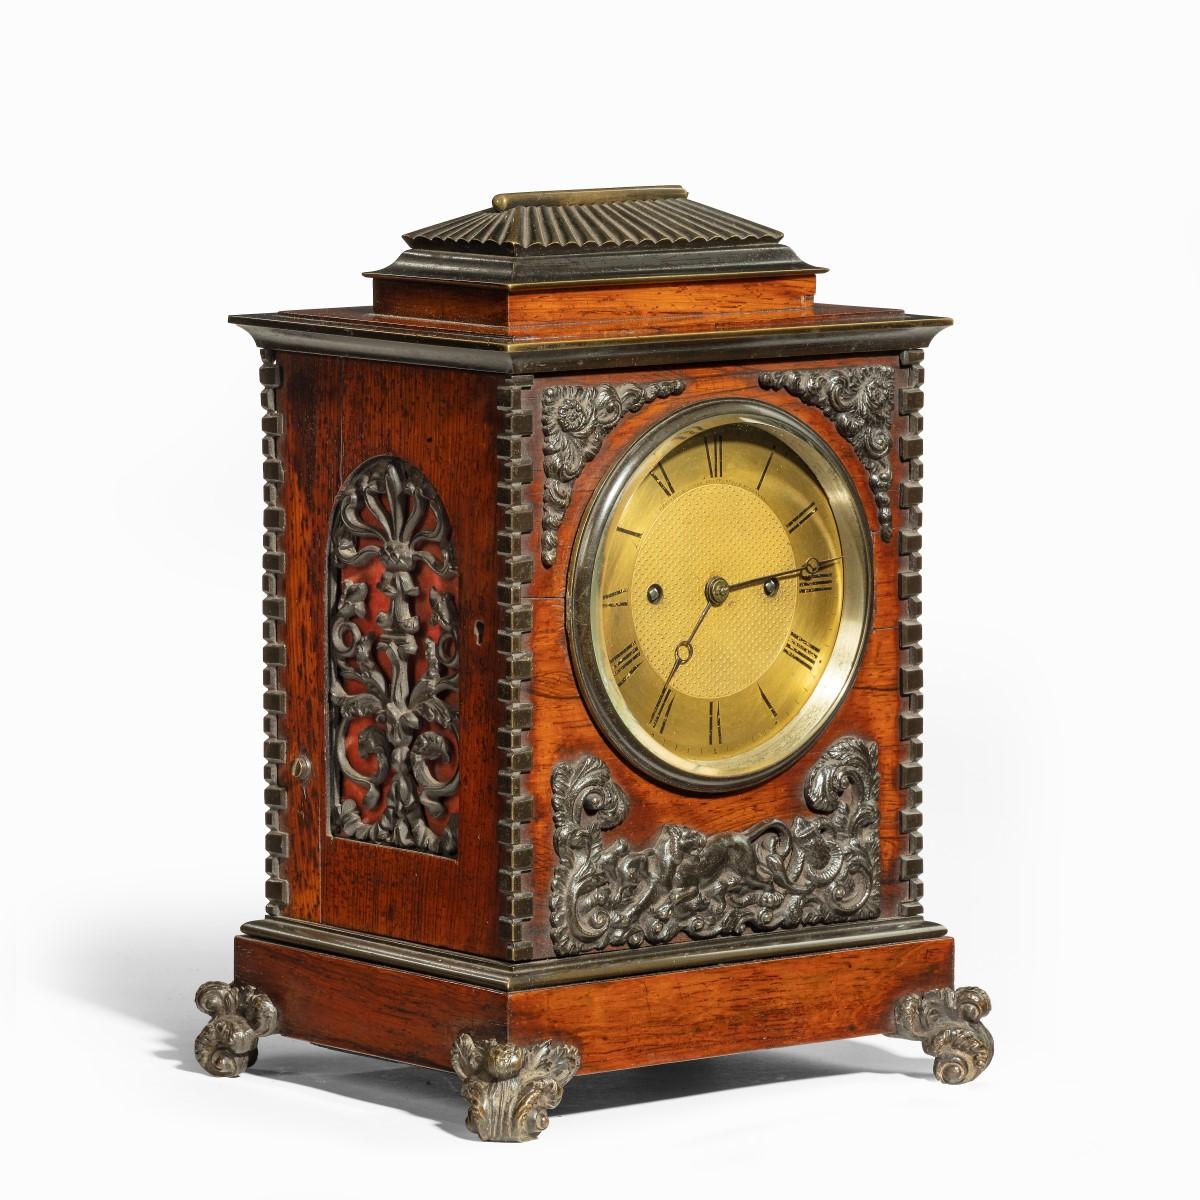 English William IV Rosewood and Bronze Bracket Clock by Frodsham 185 & Baker For Sale